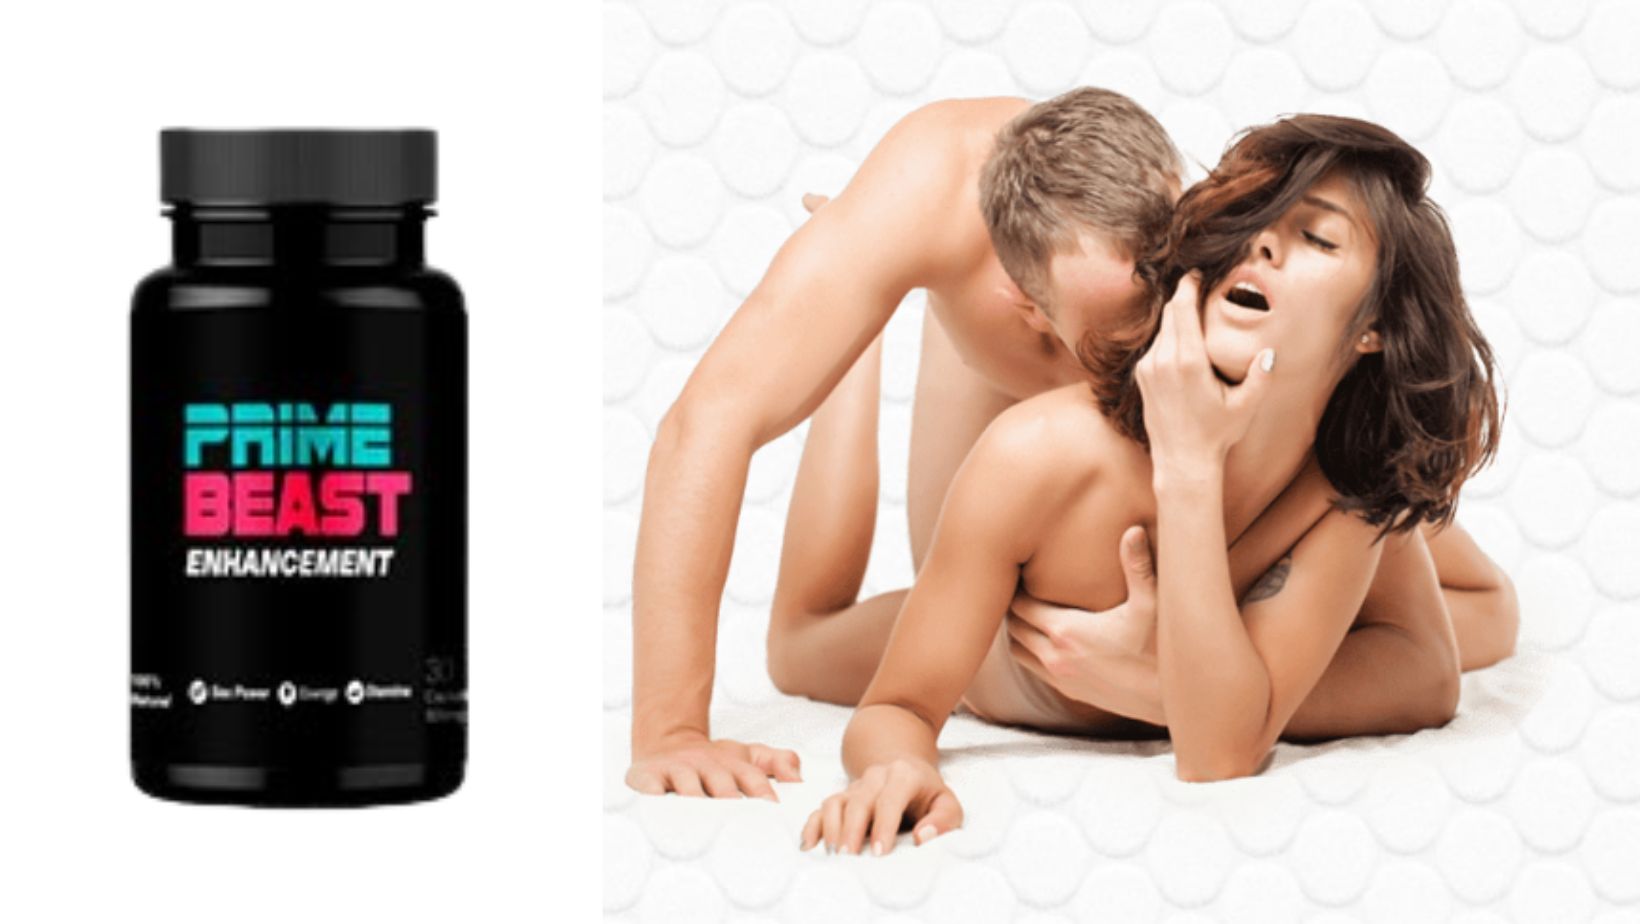 Prime Beast Enhancement Staying Power Improves the Sensitivity of Orgasm